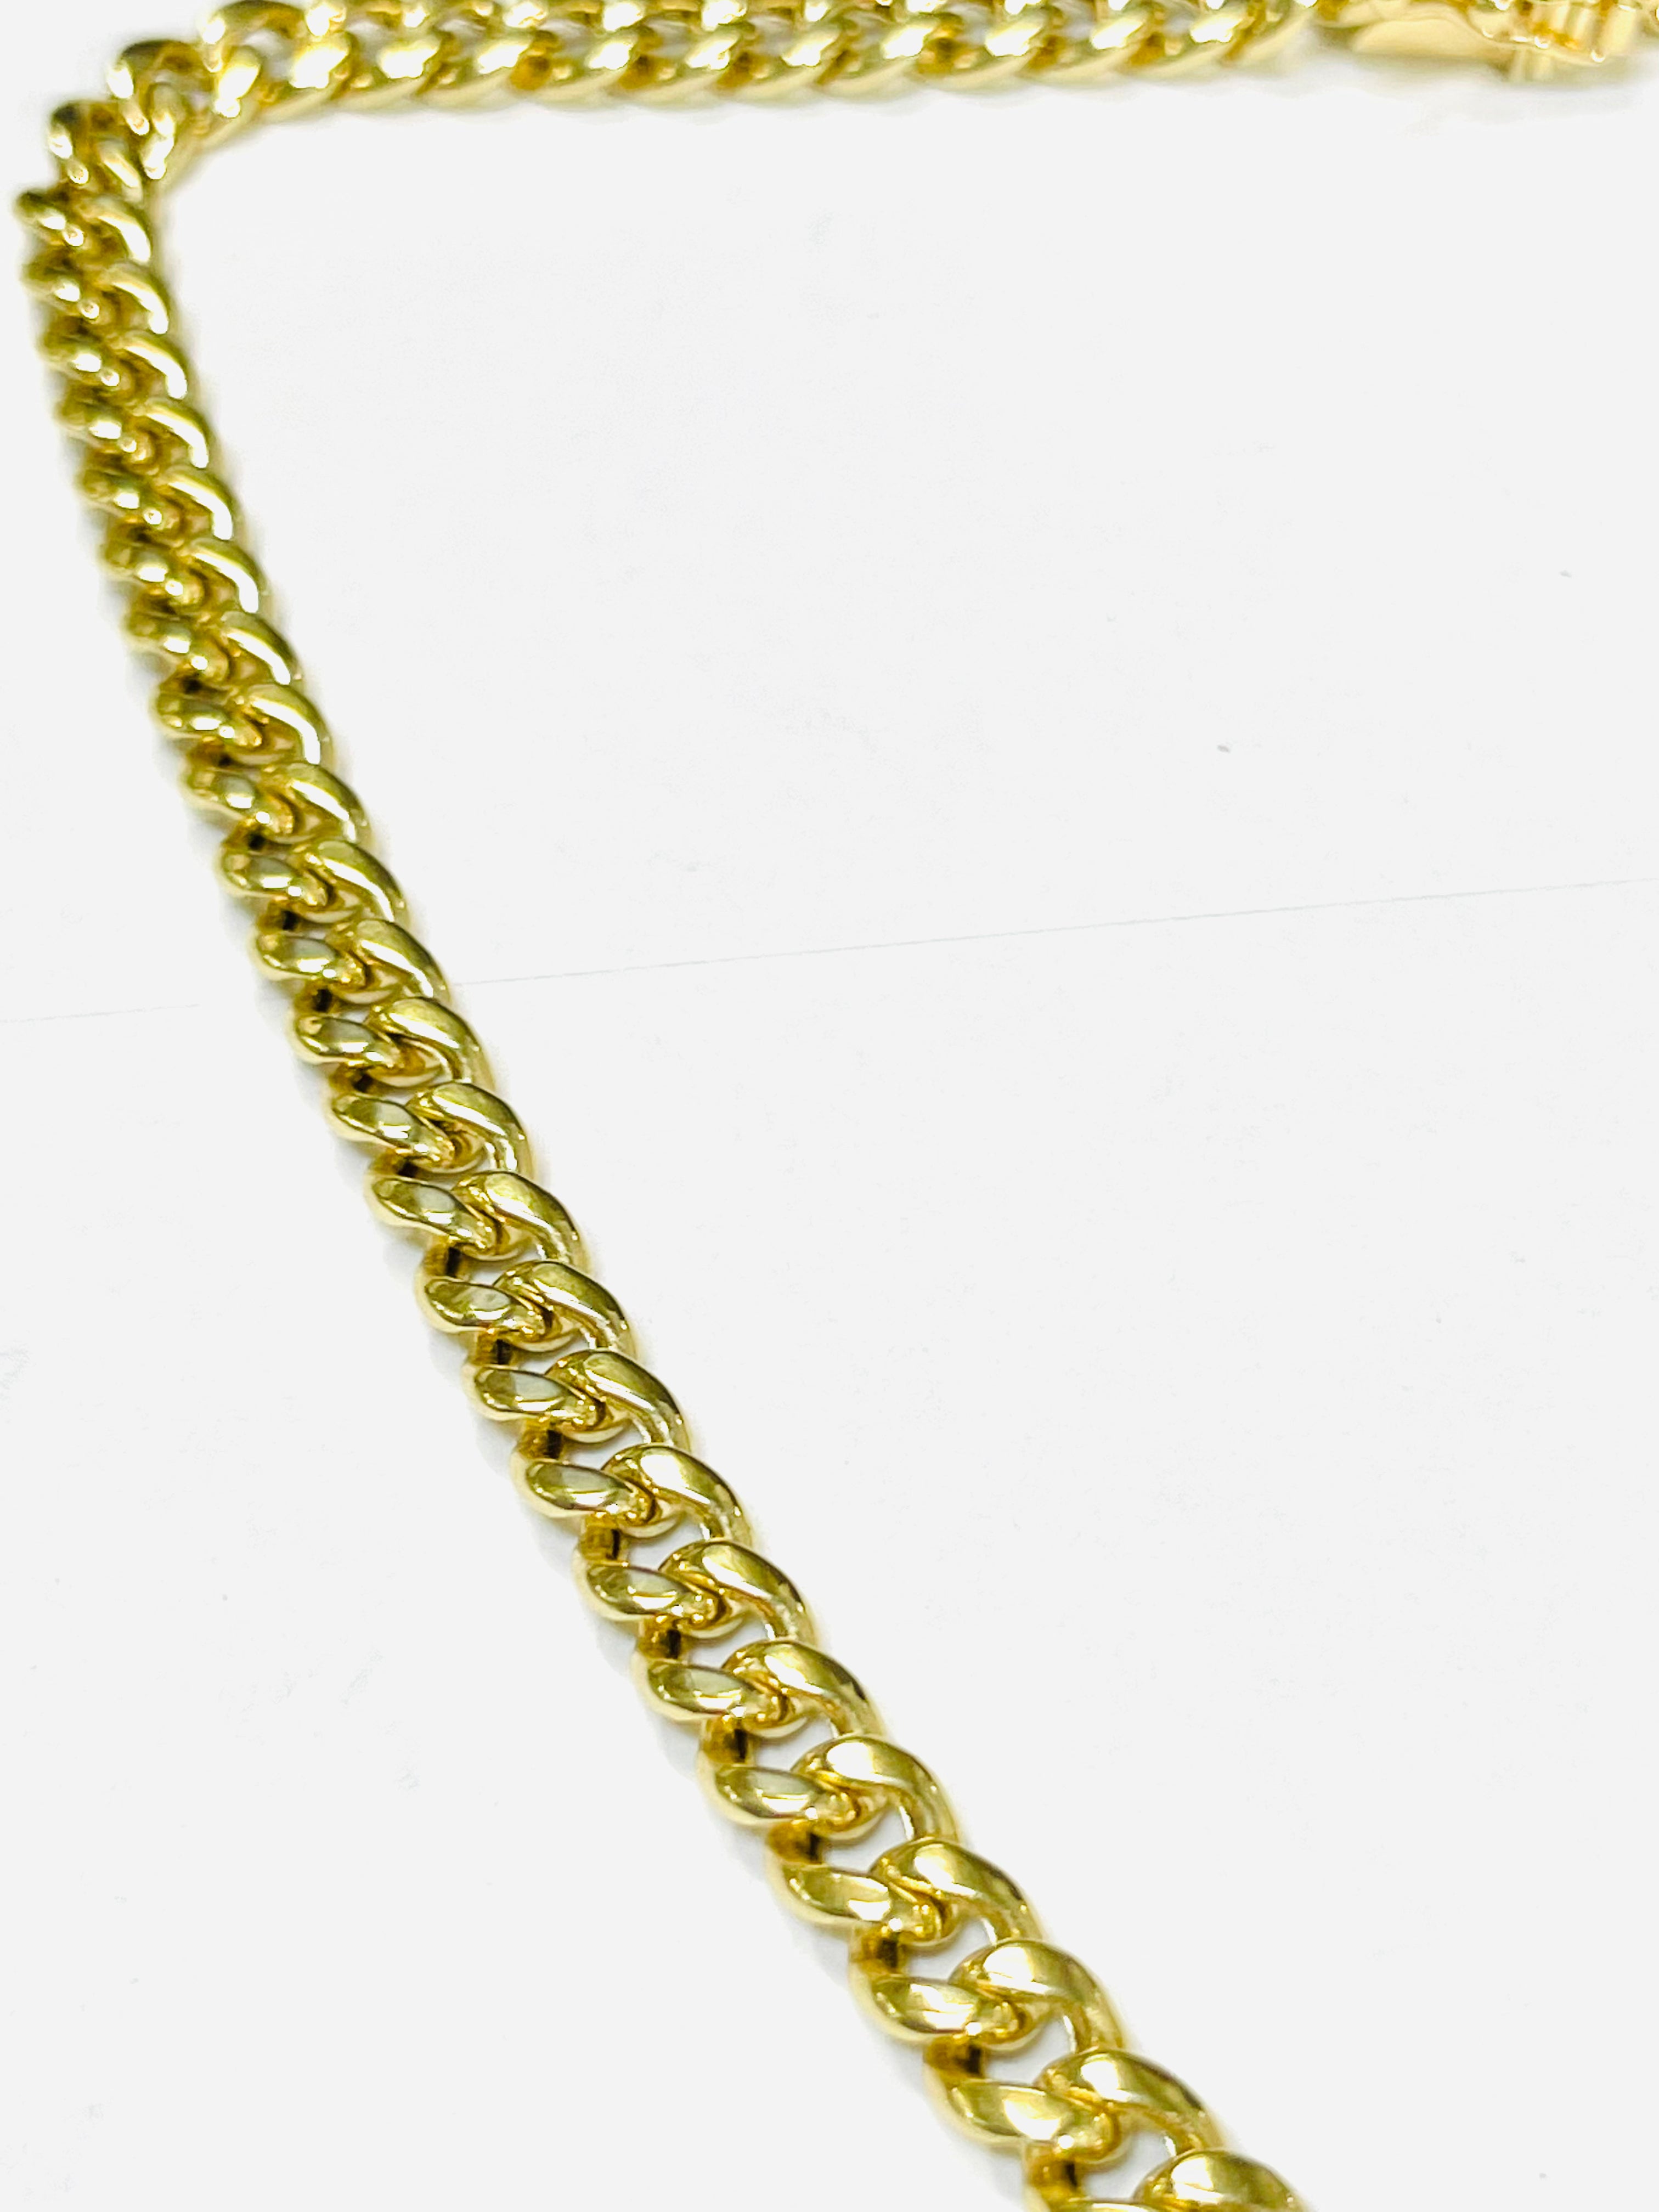 16” 6mm 14K Yellow Gold Cuban Link Chain Necklace